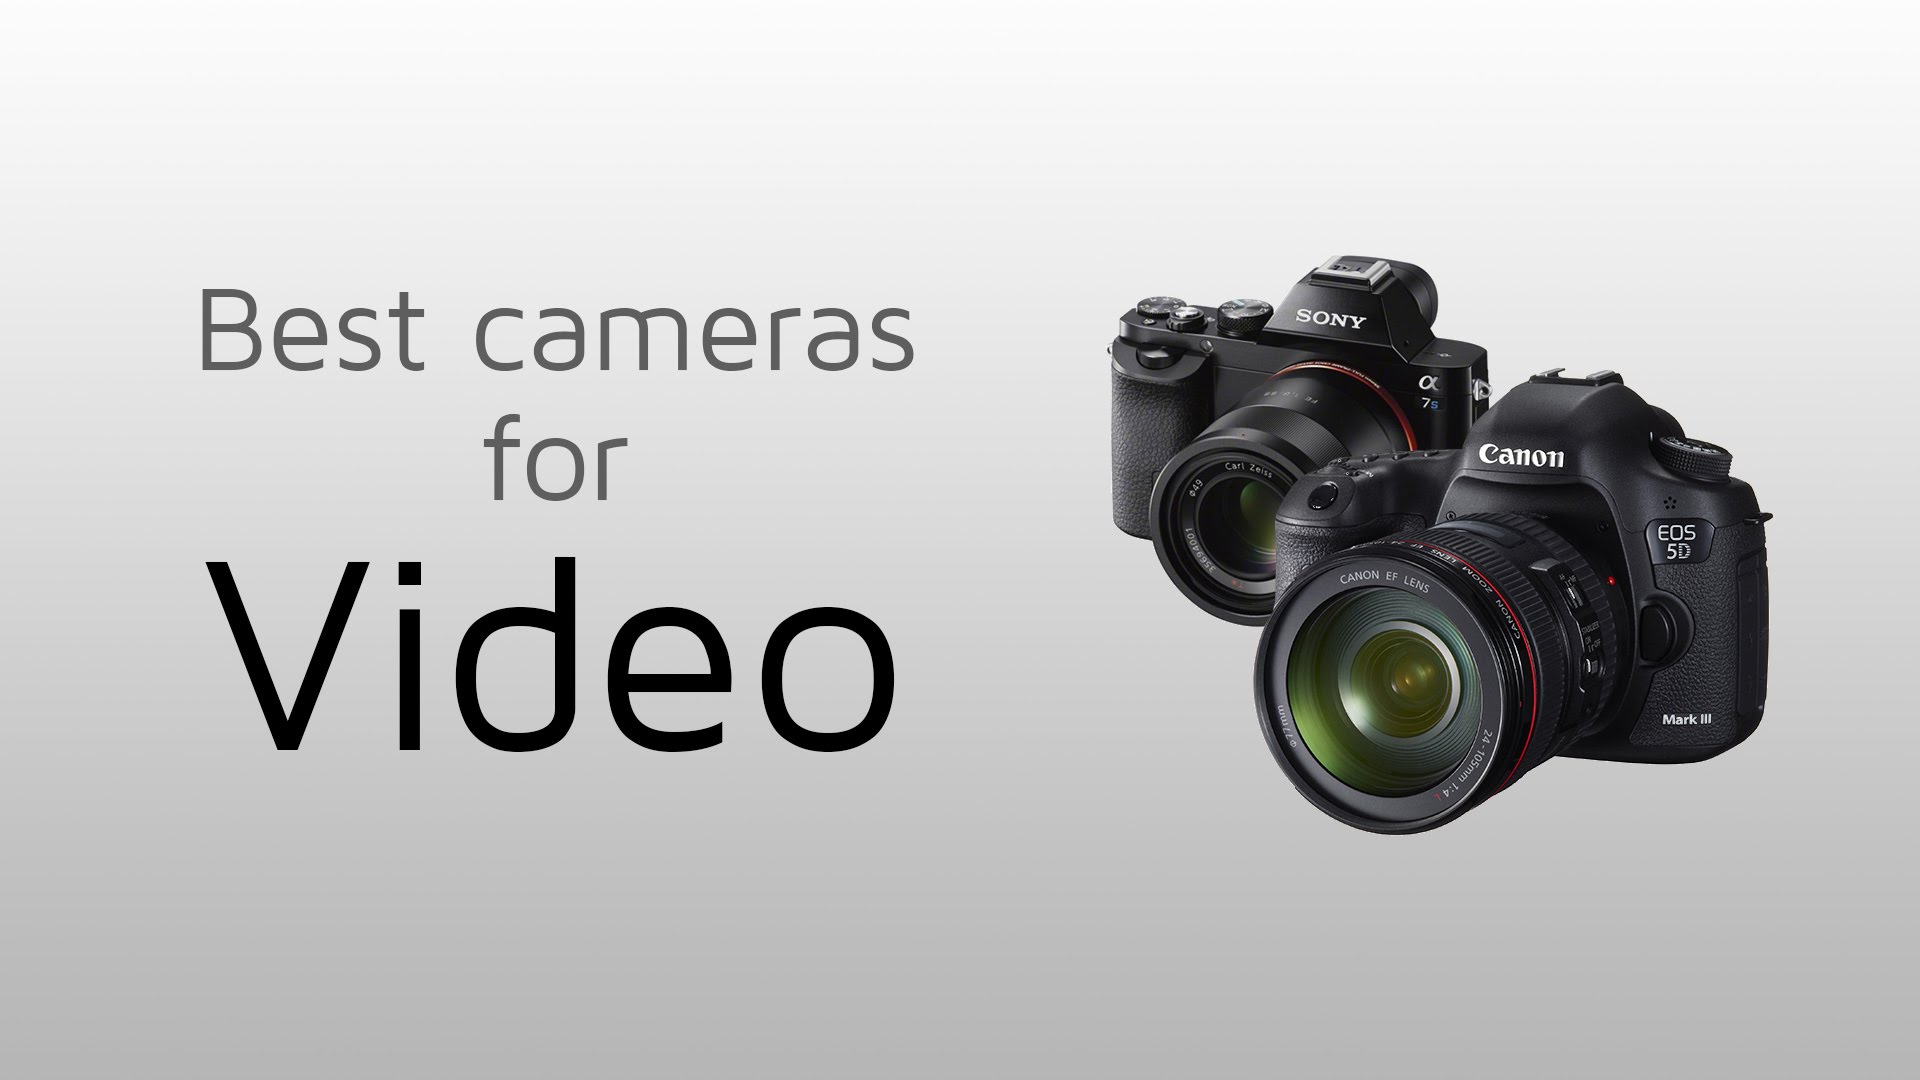 Best DSLR’s and Mirrorless cameras for video